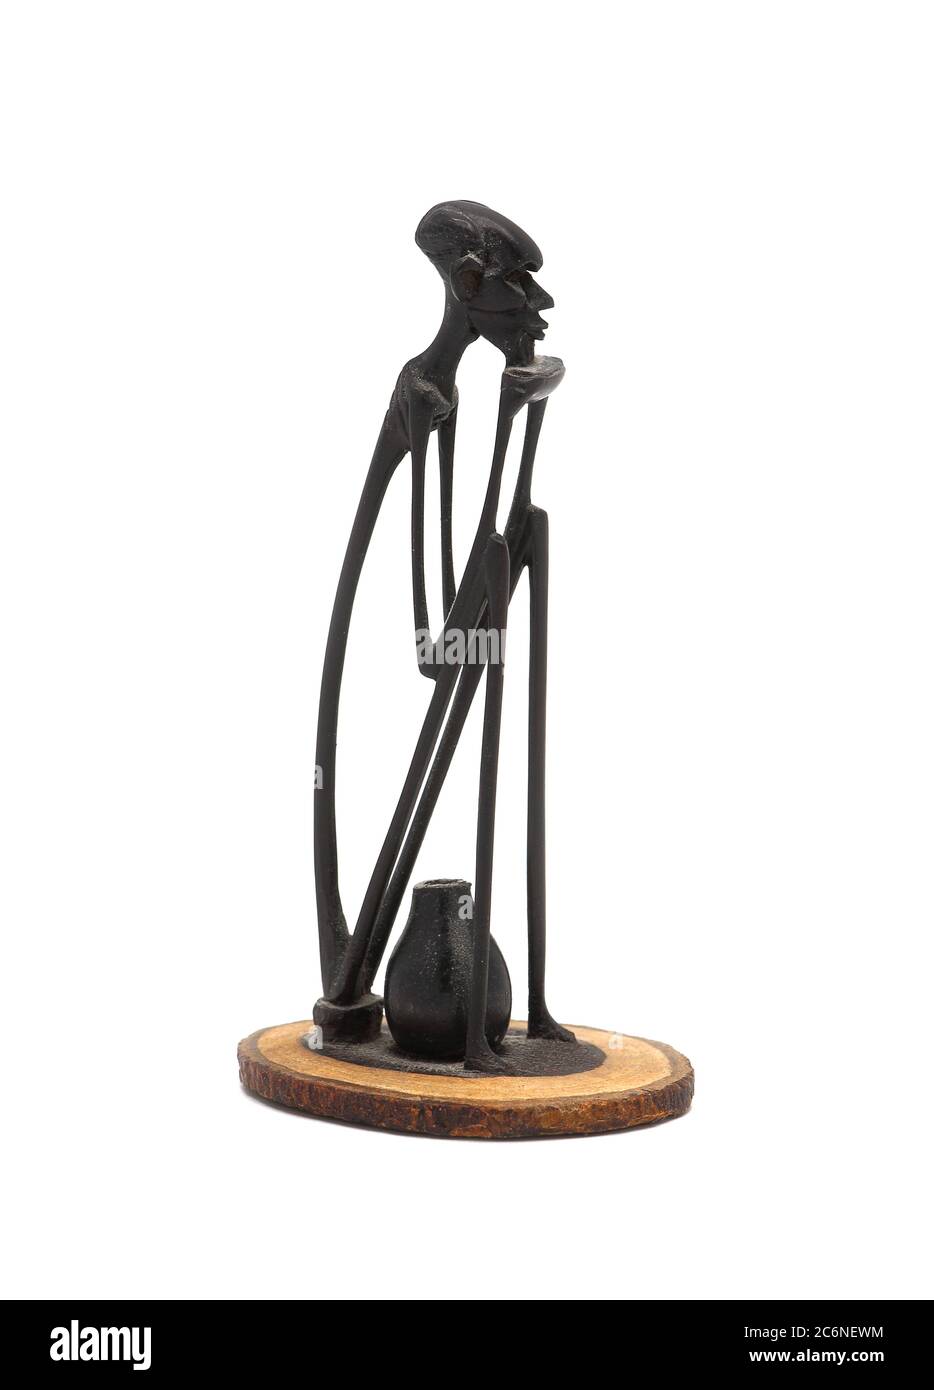 Wooden miniature ebony figurine on a light background in an unusual design. The work of an unknown master. Souvenir. East Africa, July 11, 2020. Stock Photo